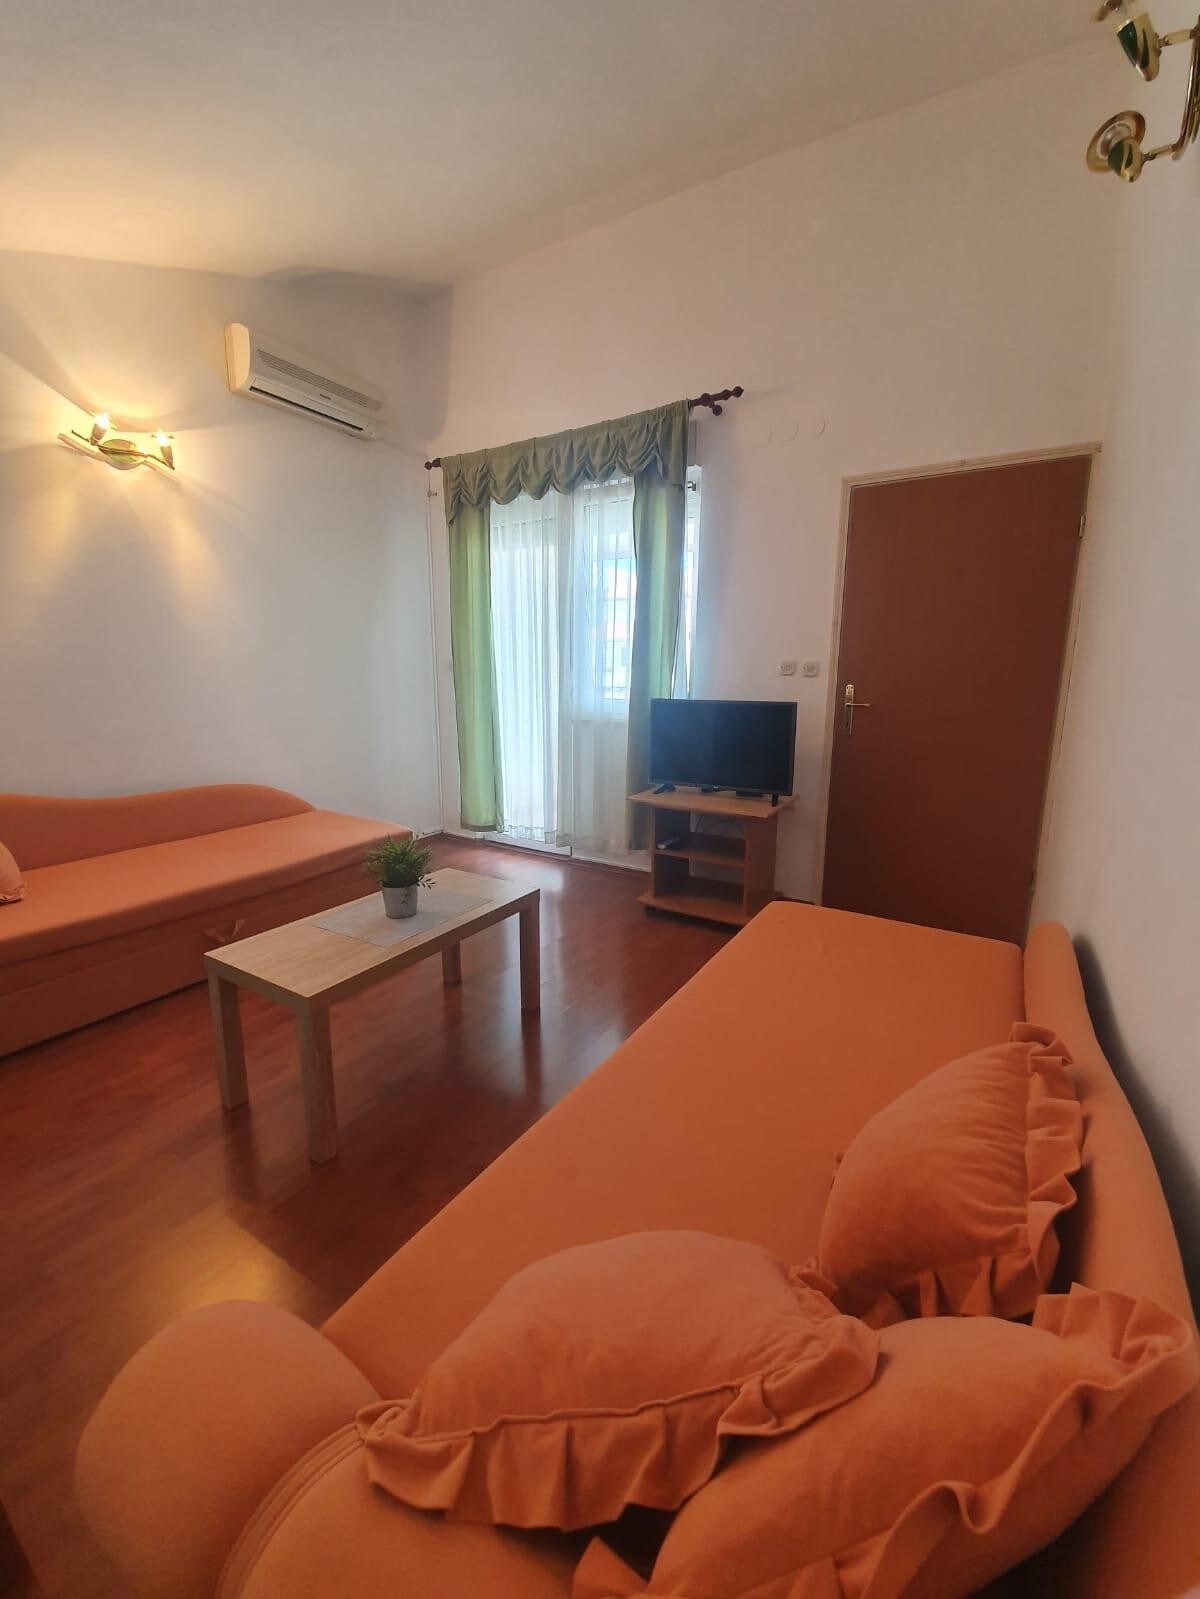 A-15386-b One bedroom apartment with balcony